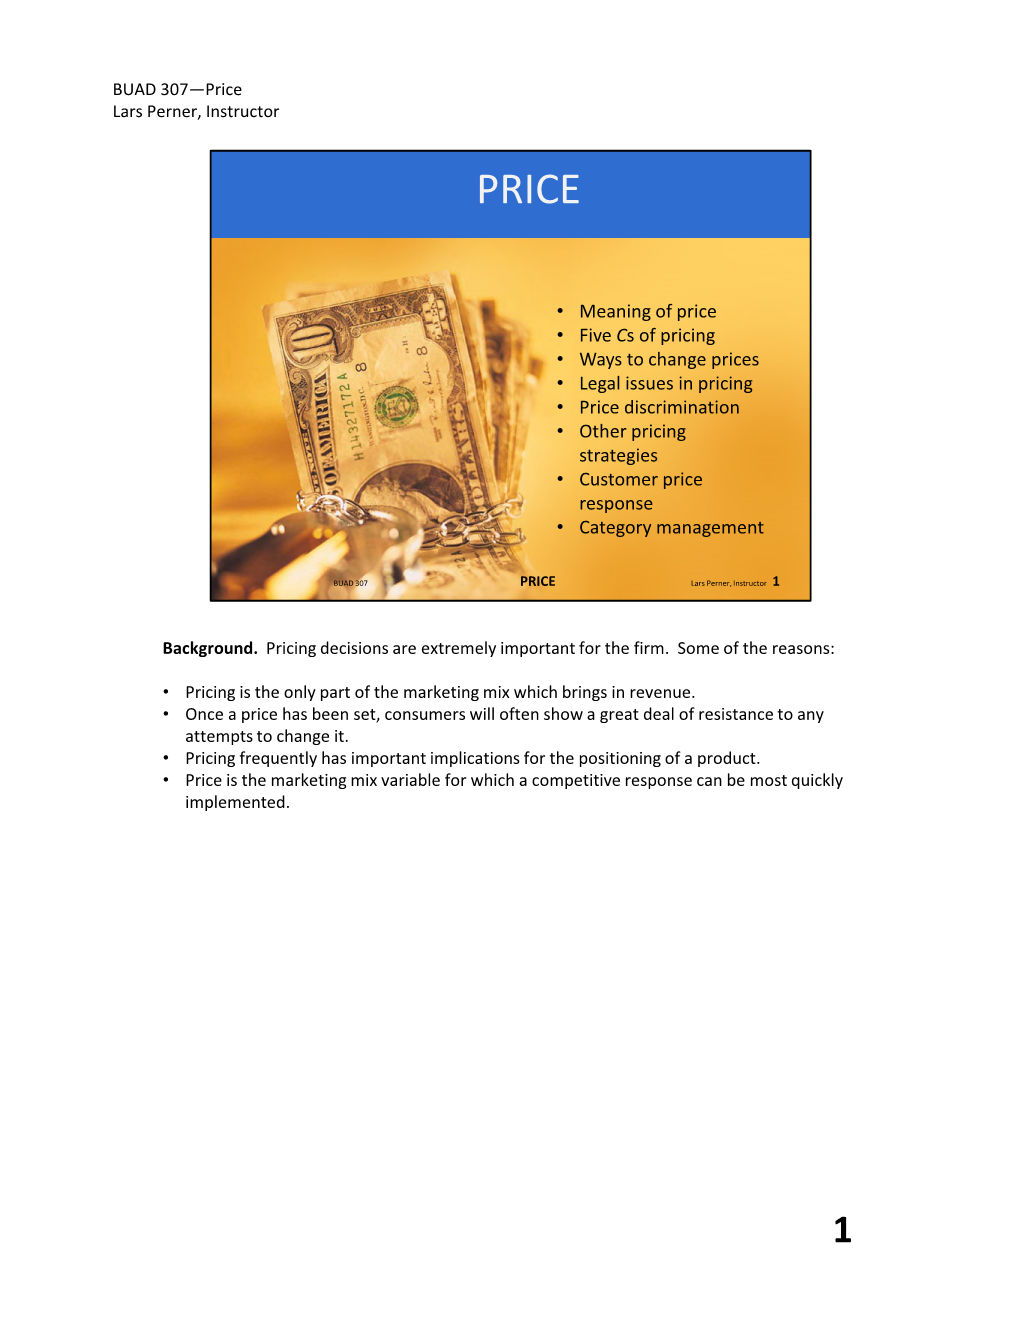 Meaning of Price • Five Cs of Pricing • Ways to Change Prices